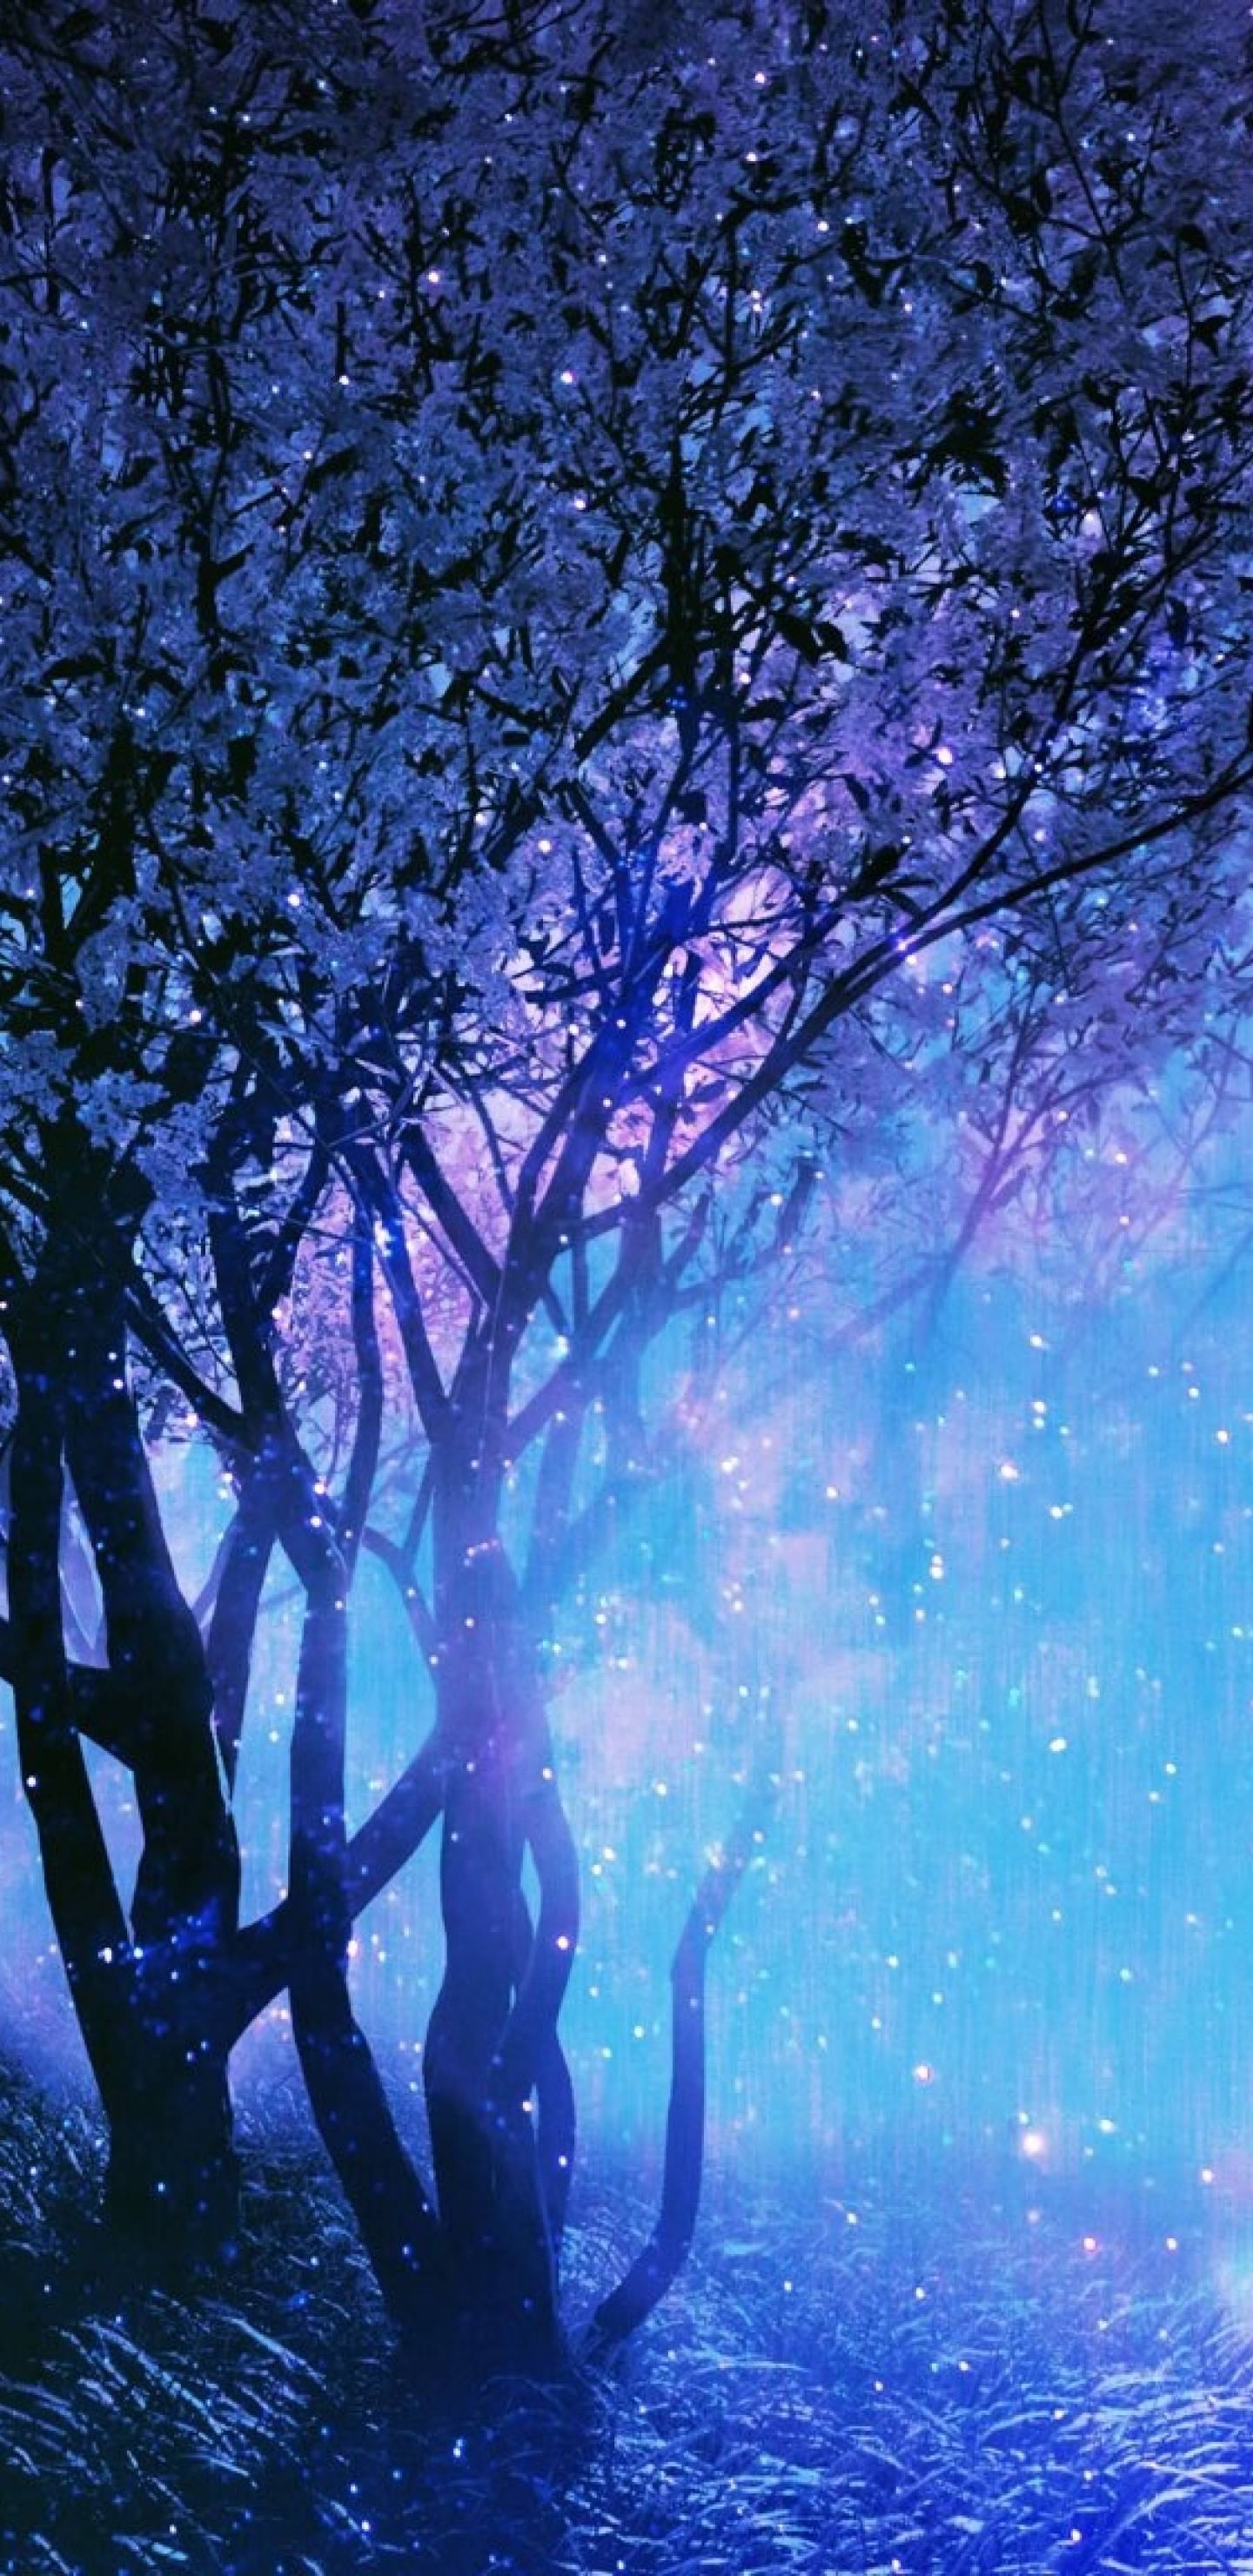 A tree with blue lighting in the background - Ghost, nature